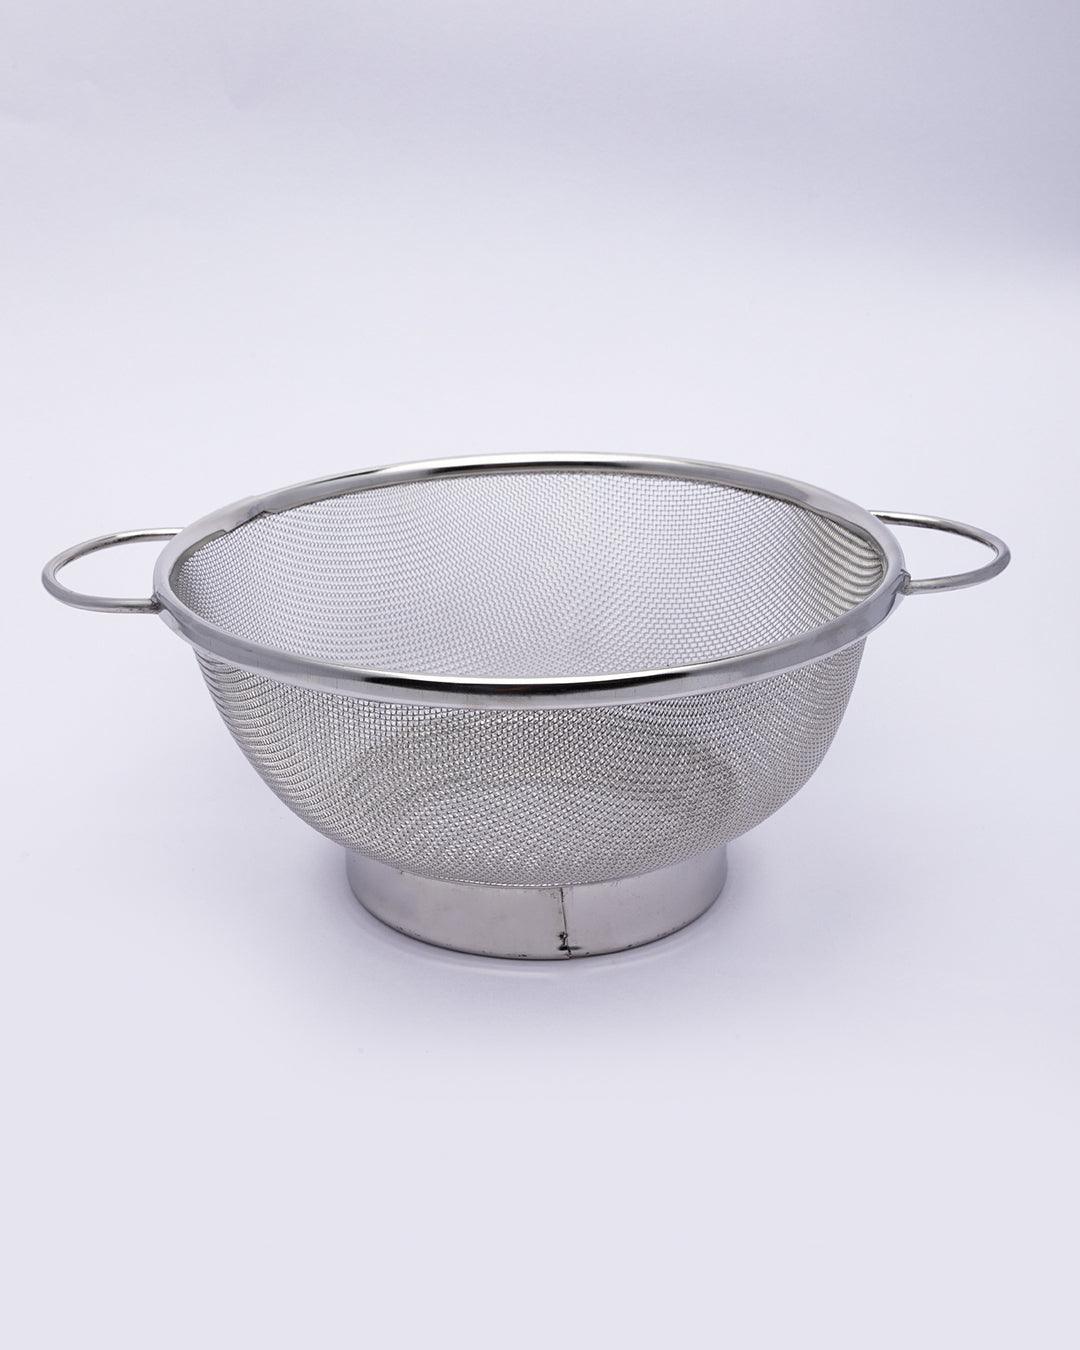 Stainless Steel Colander, Precision Pierced Strainer For Pasta, Rice, & Fruits, Wide Rim & Handles, Steaming, Draining & Rinsing, Silver, Stainless Steel - MARKET 99